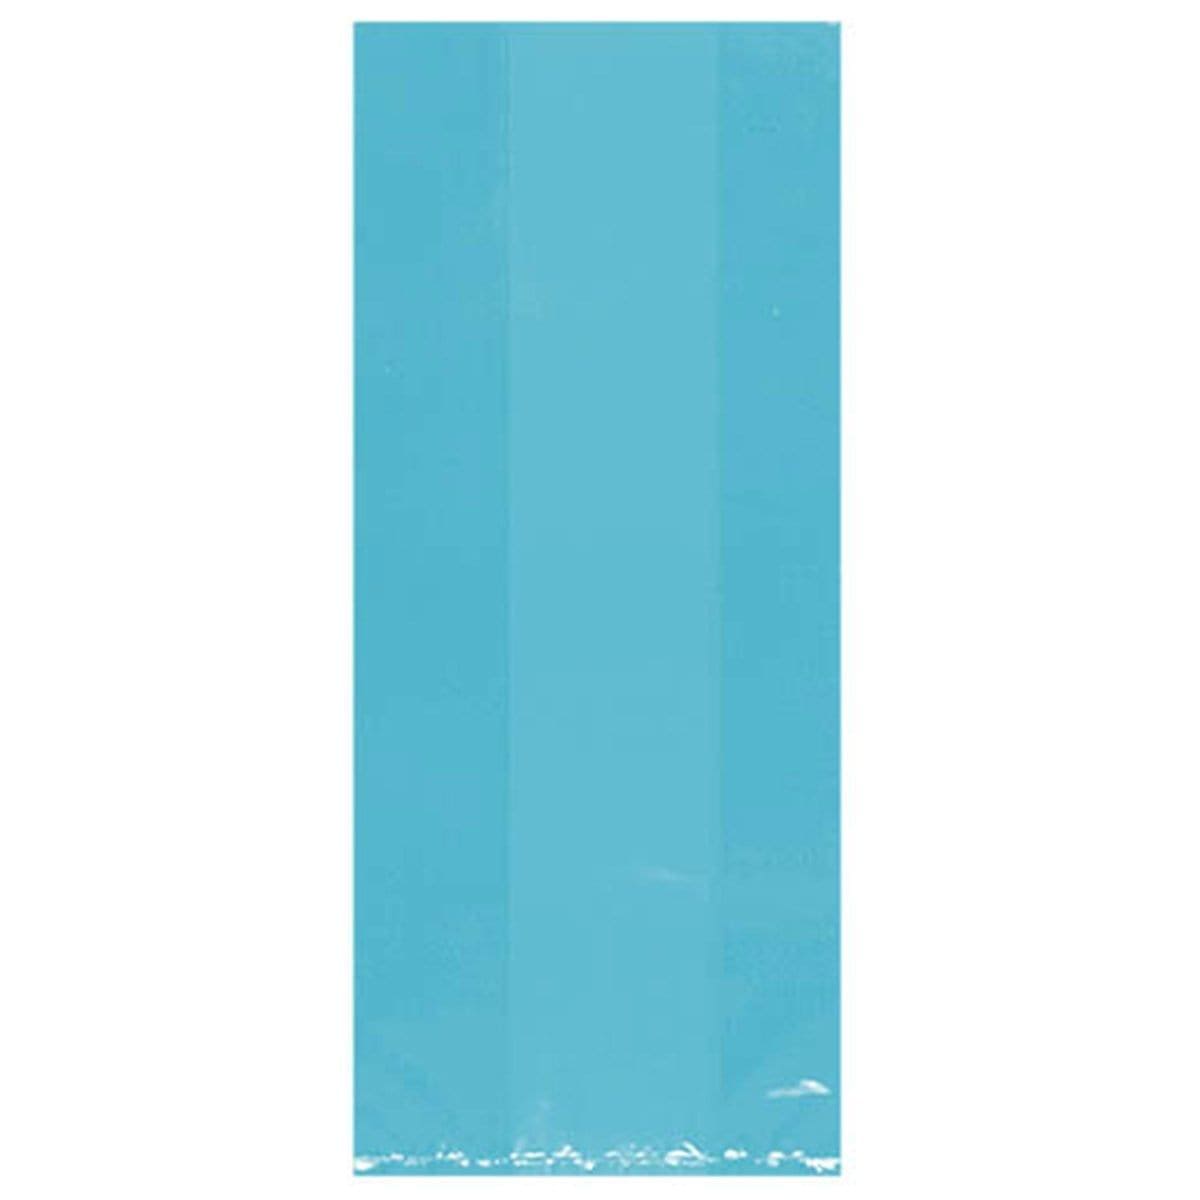 Buy Party Supplies Cello Bags - Caribbean Blue 9.5 x 4 x 2.25 in. 25/pkg sold at Party Expert